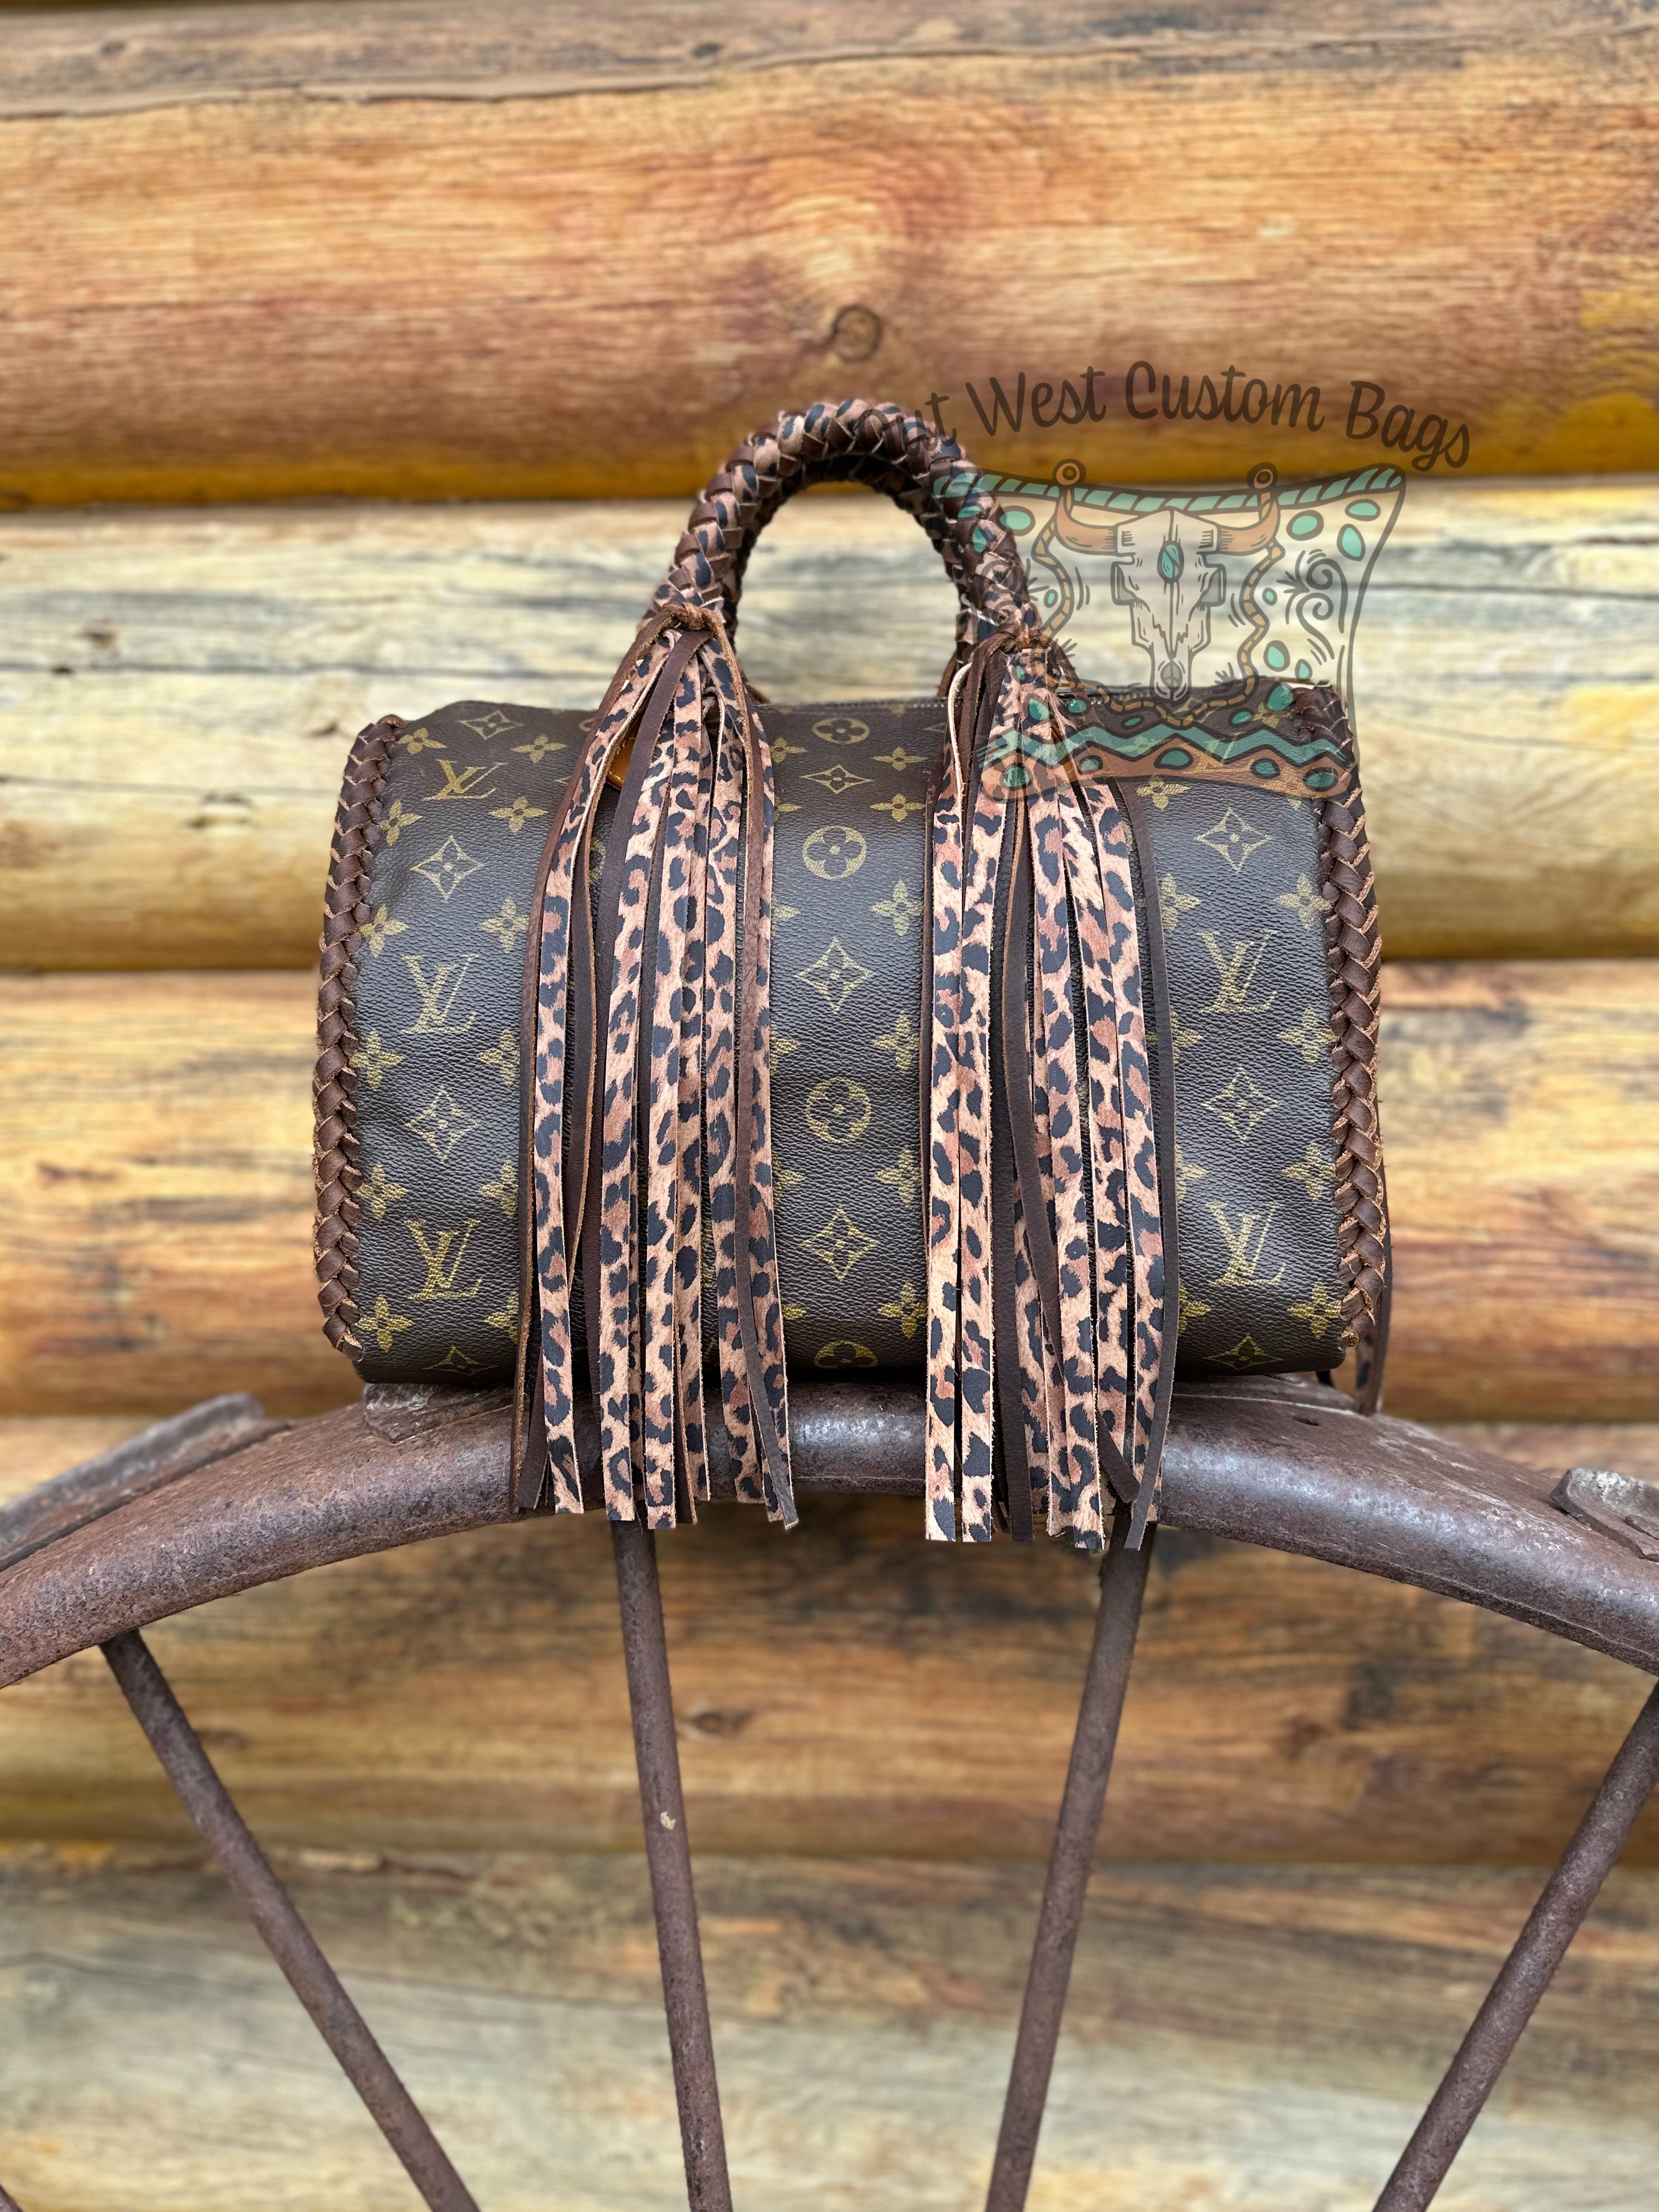 Out West Speedy 30 or 35 Revamped with Leather Braiding and Fringe